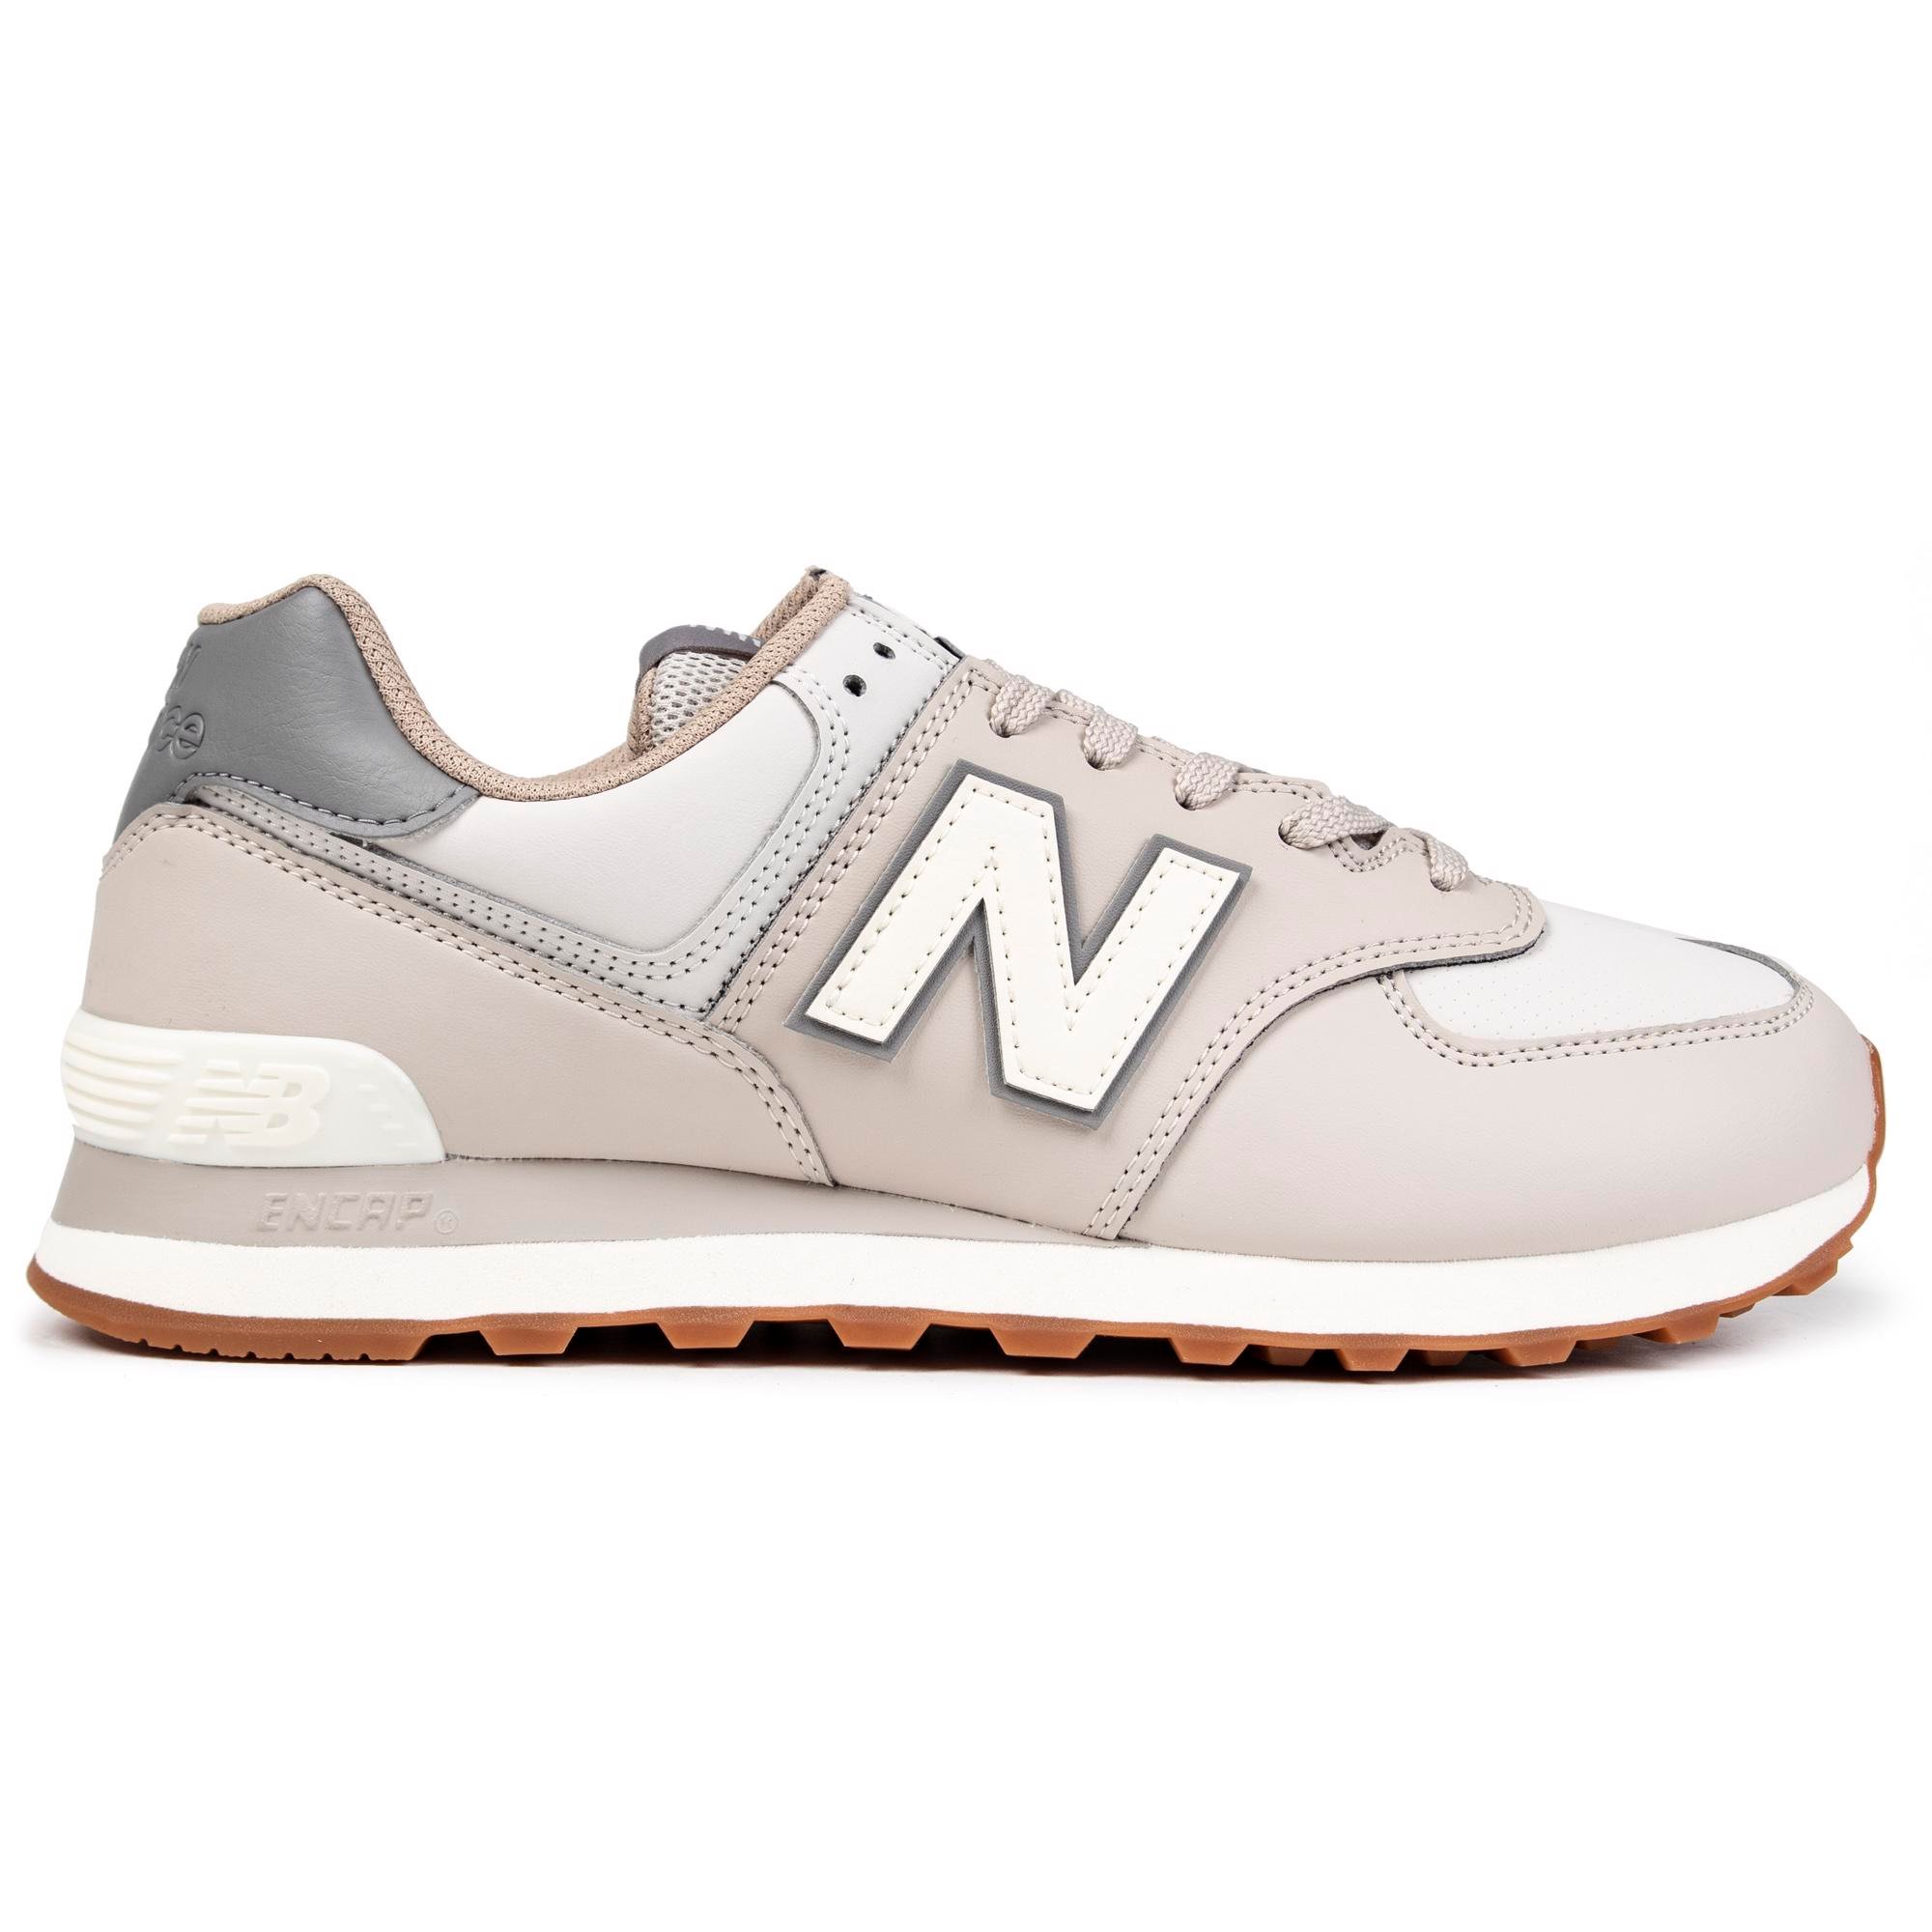 Two degrees Rhythmic Reorganize Cheap Mens timberwolf/angora New Balance 574 Vegan Trainers | Soletrader  Outlet